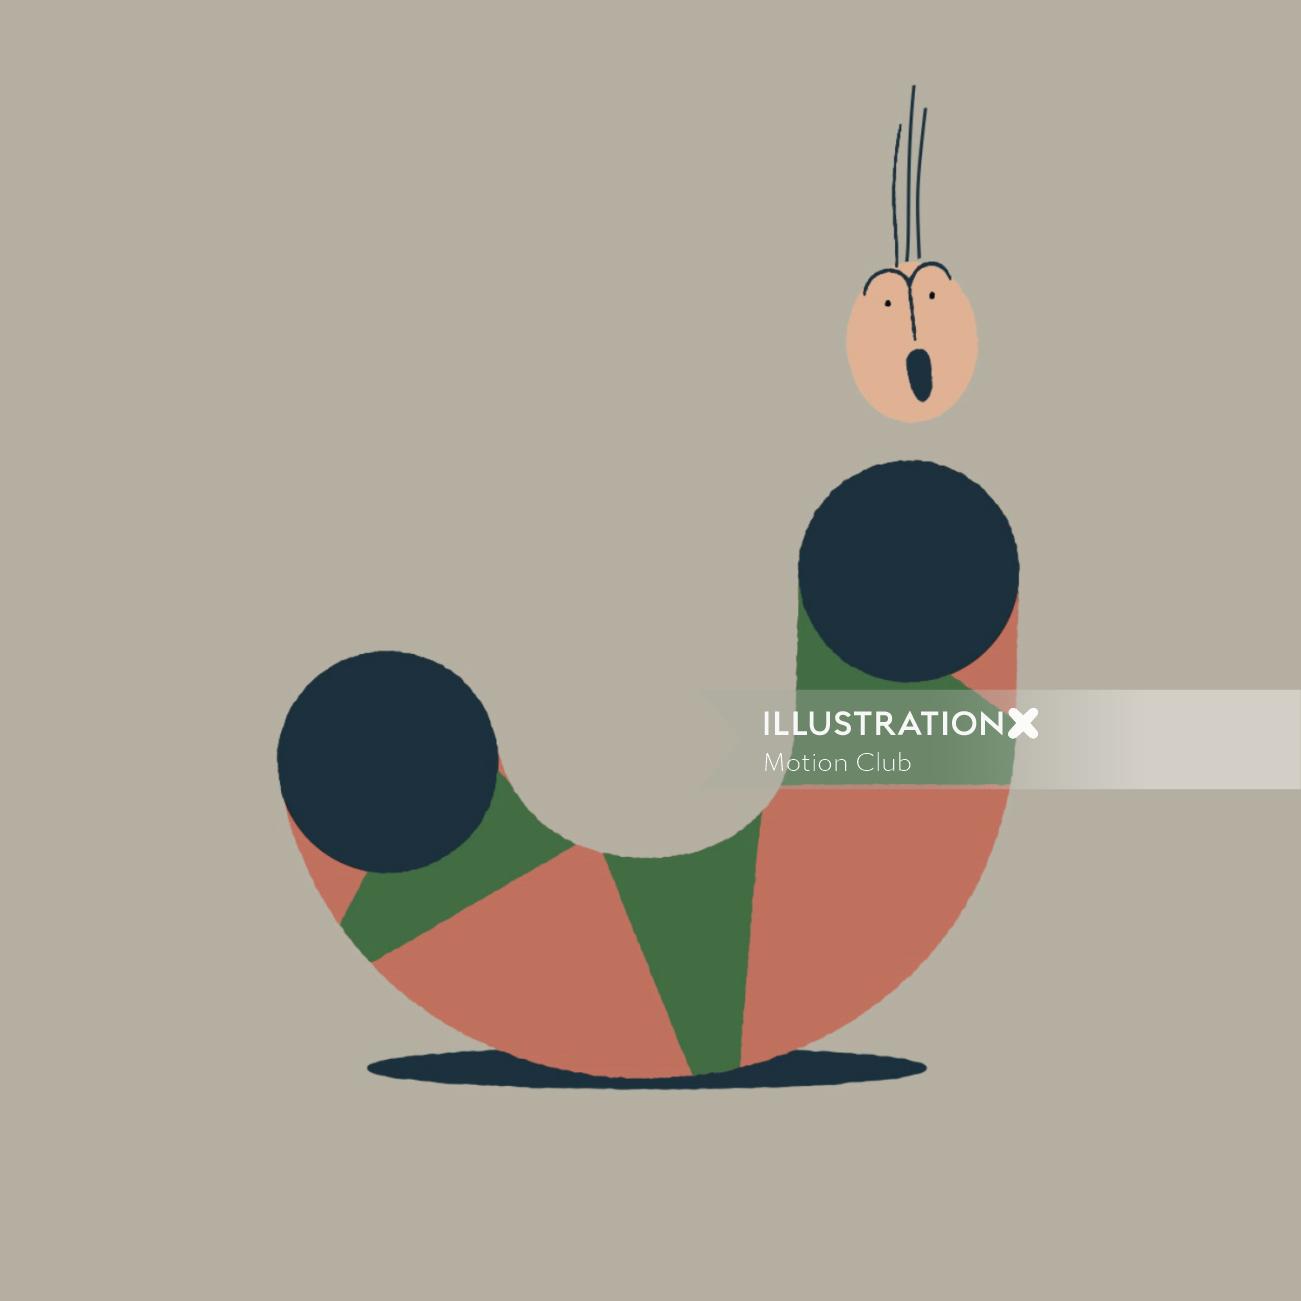 Character inspired by mid-century modern design by motion club
